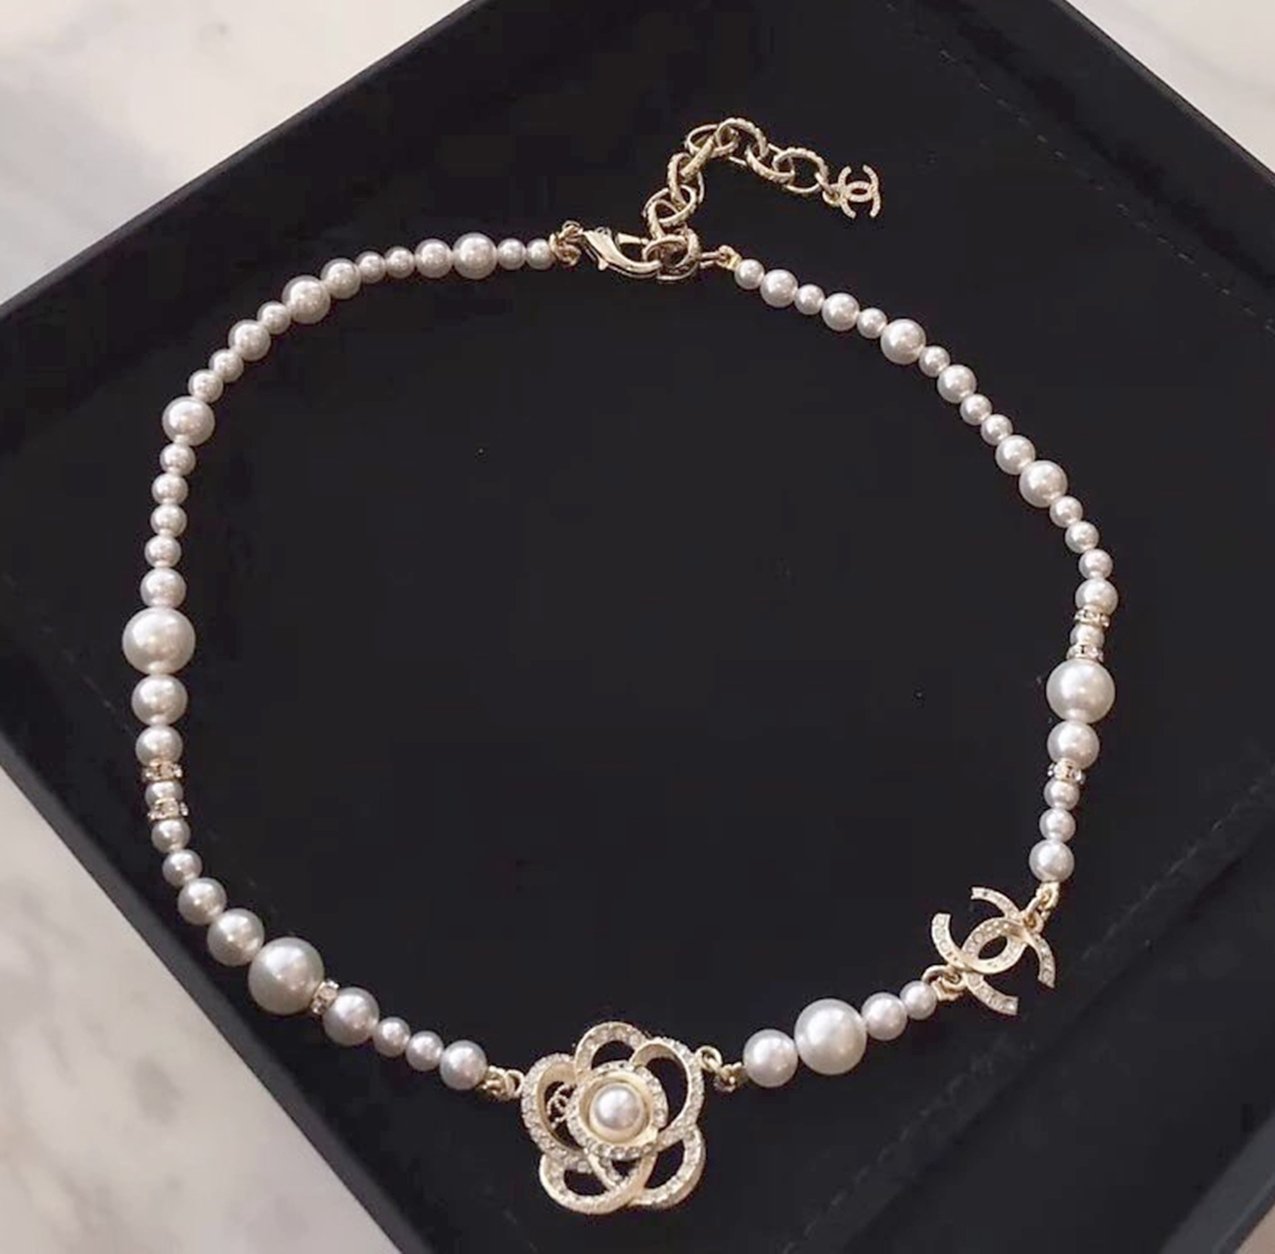 CHANEL Camellia CC Crystal Pearl Short Necklace Gold Metal